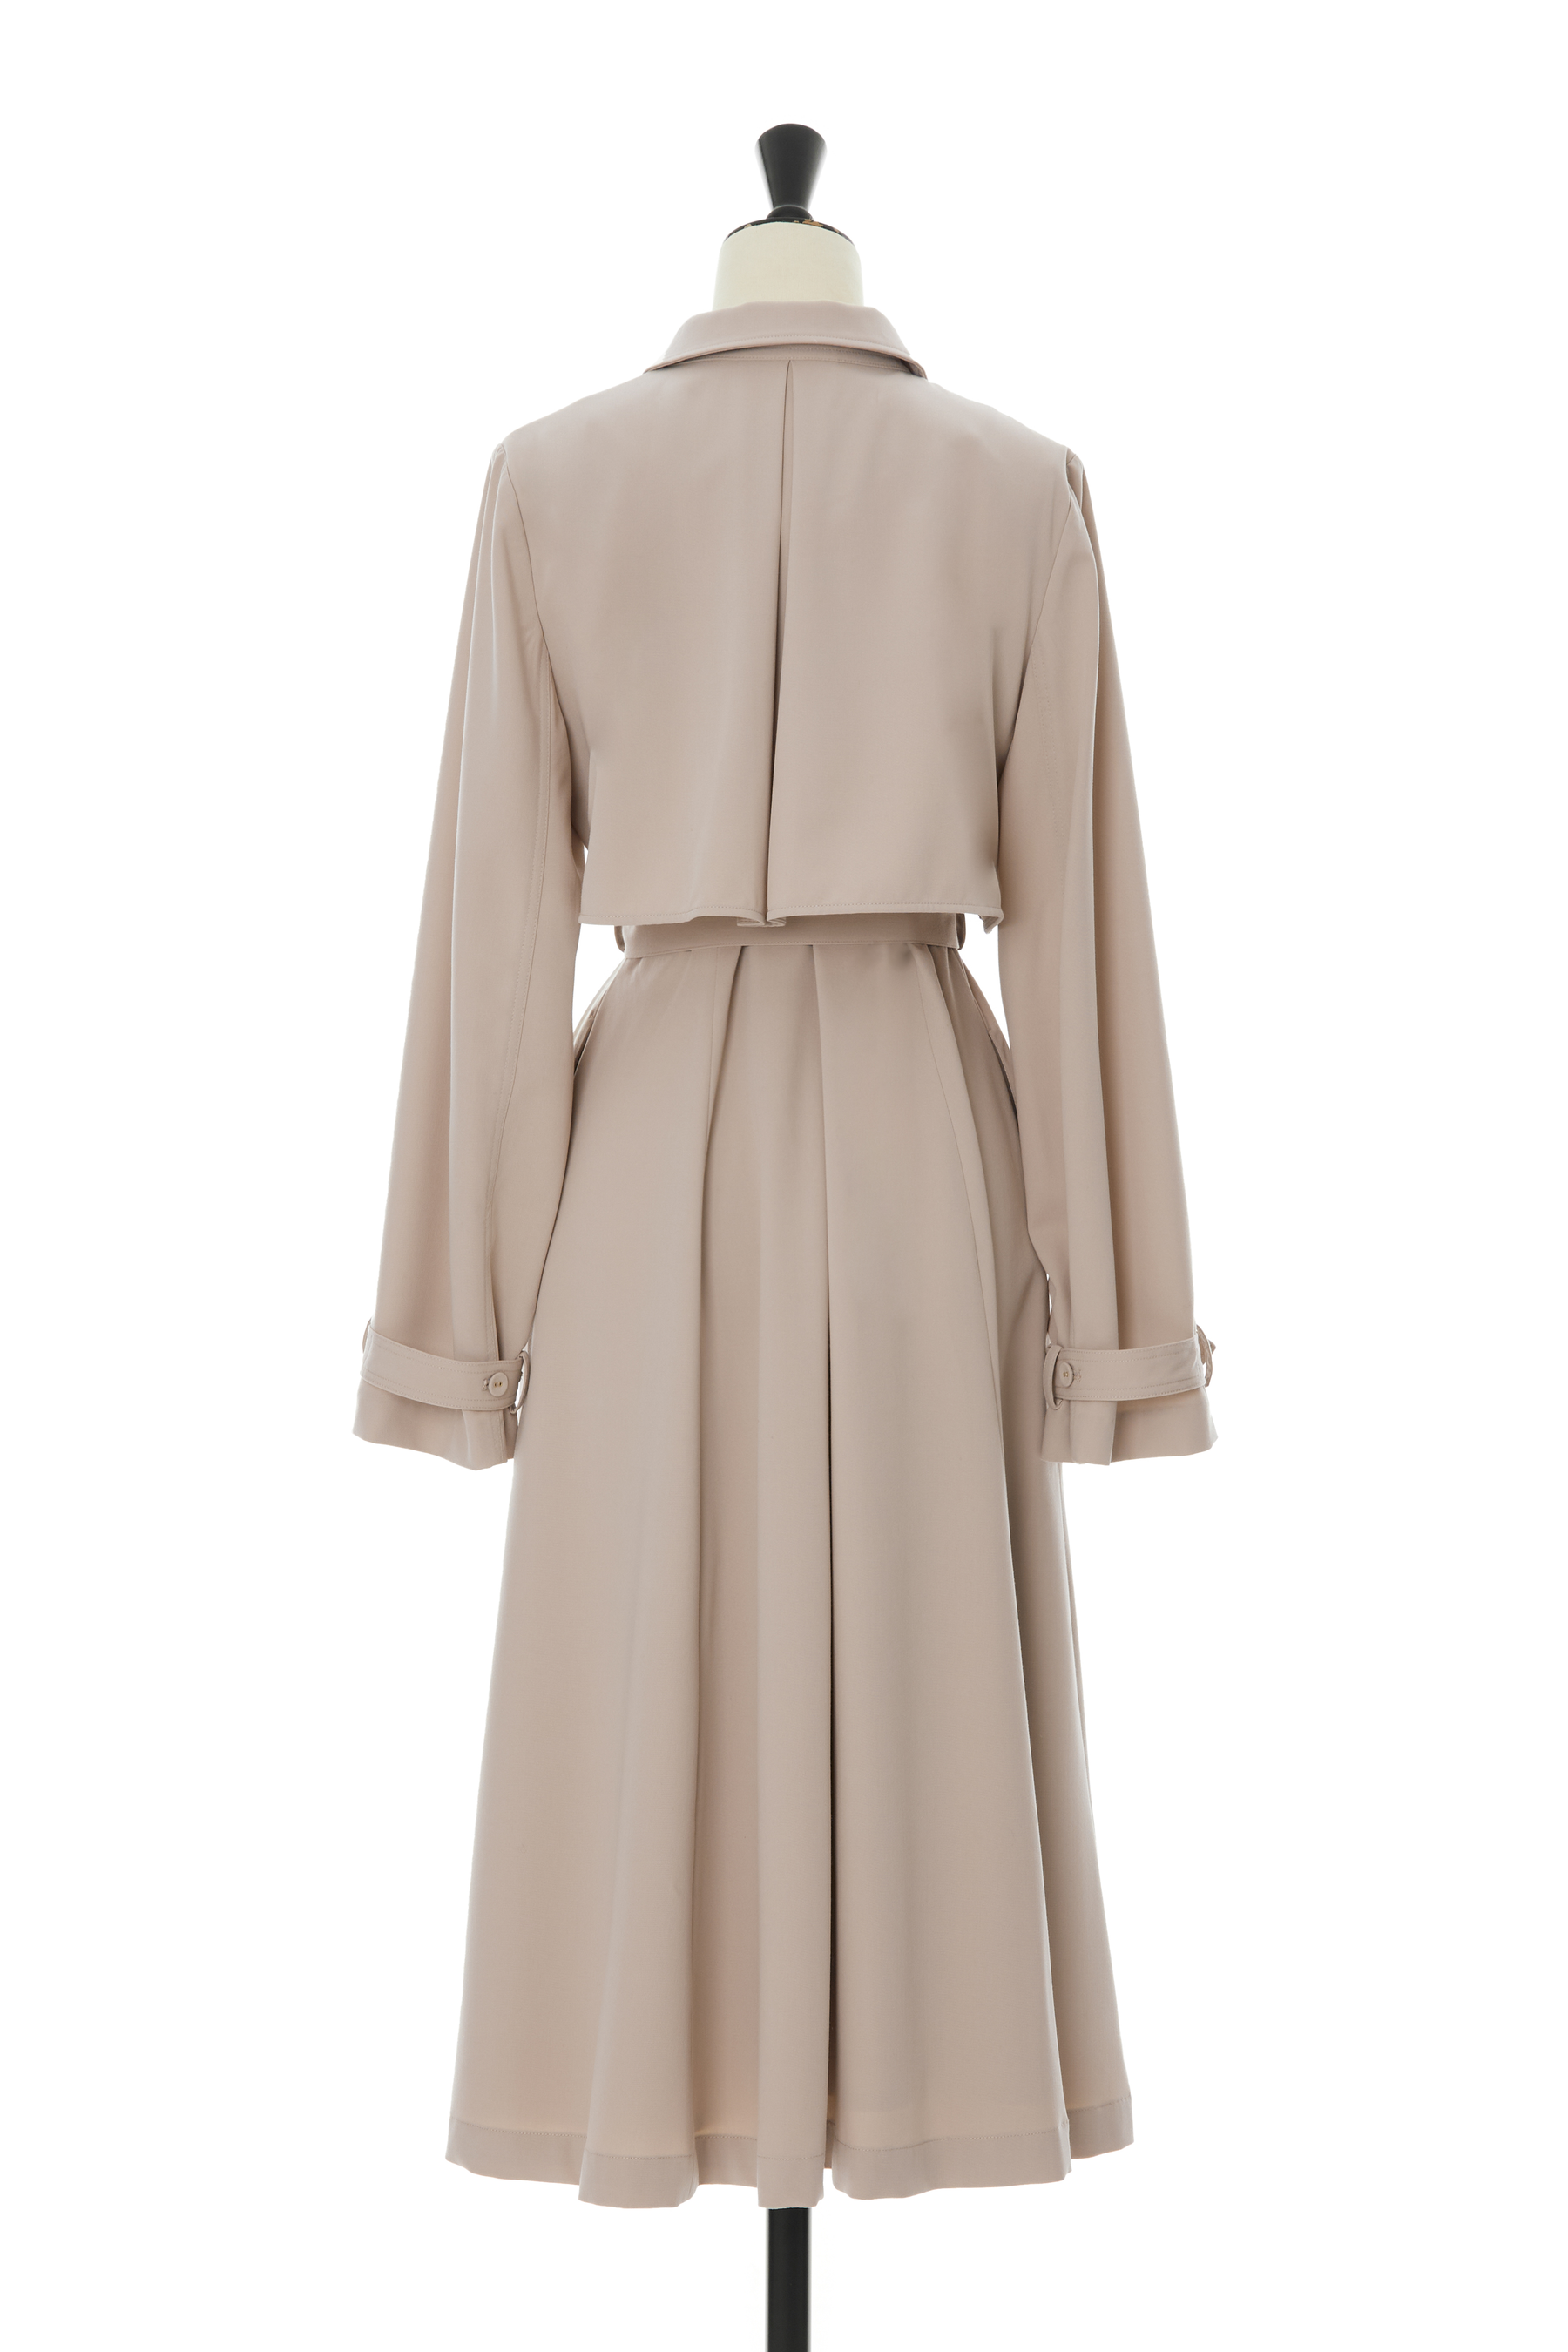 Herlipto Belted Dress Trench Coat Taupe - www.fountainheadsolution.com